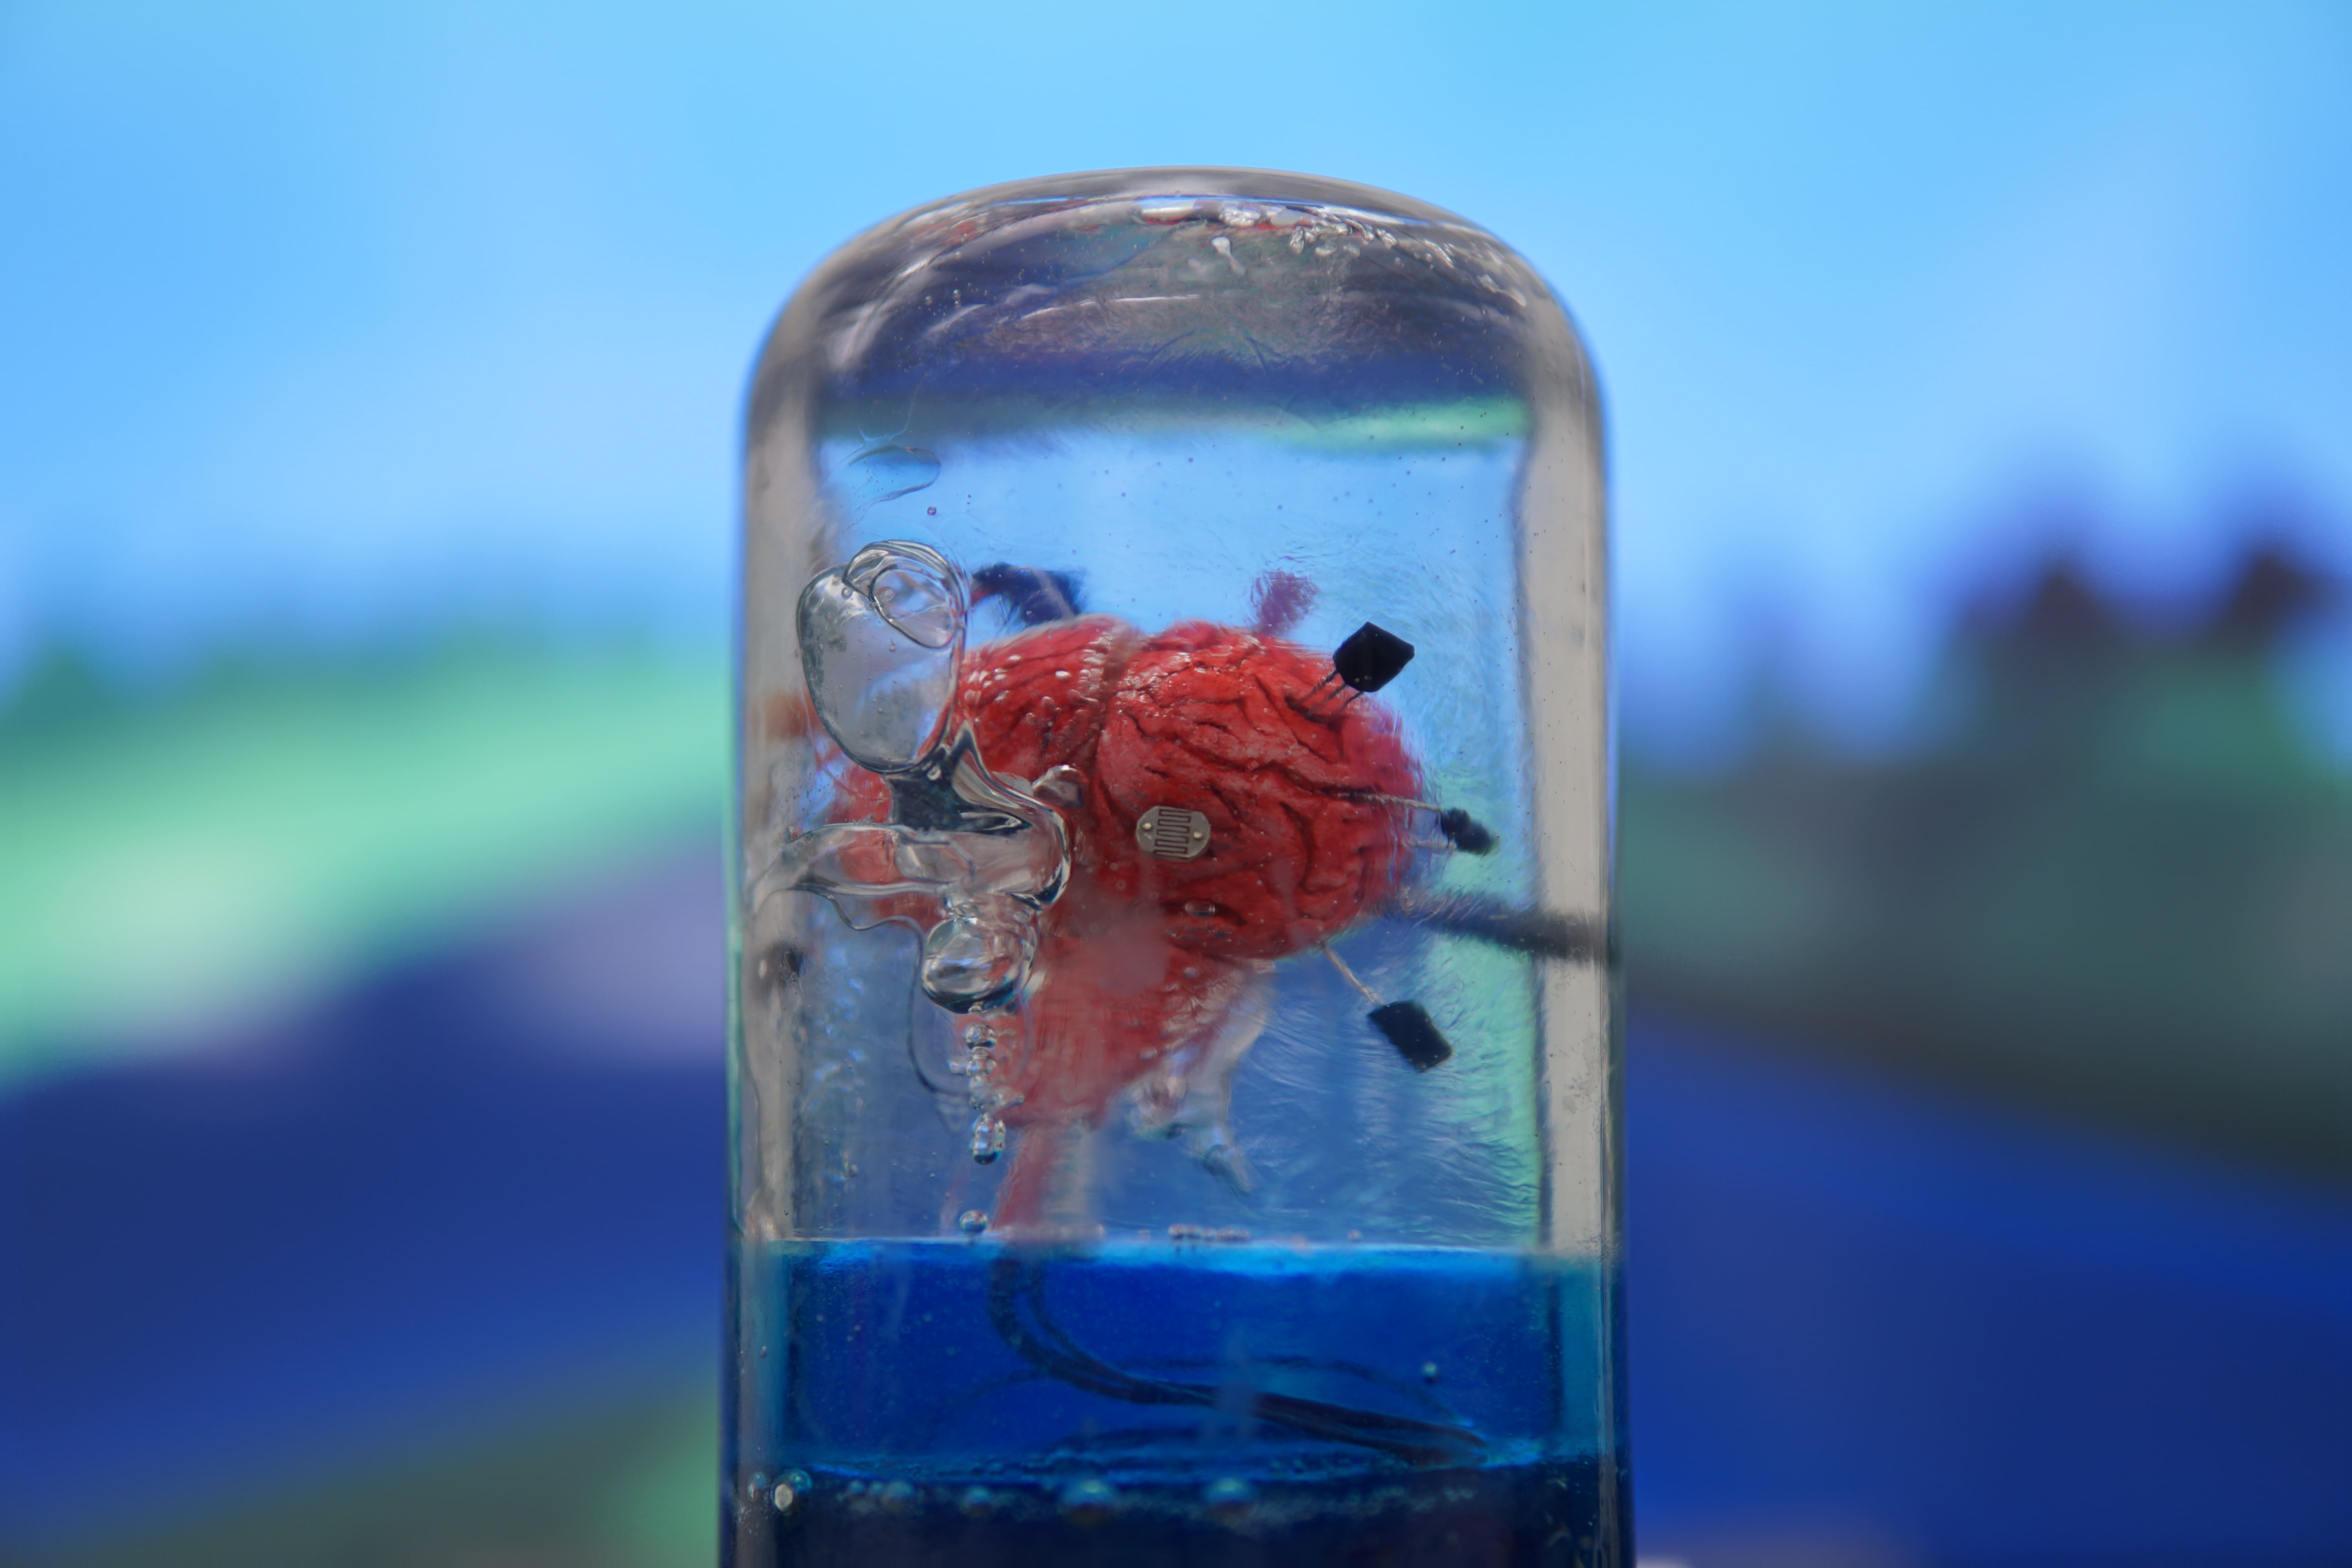 Observer, Physical object, miniature of a brain in the jar